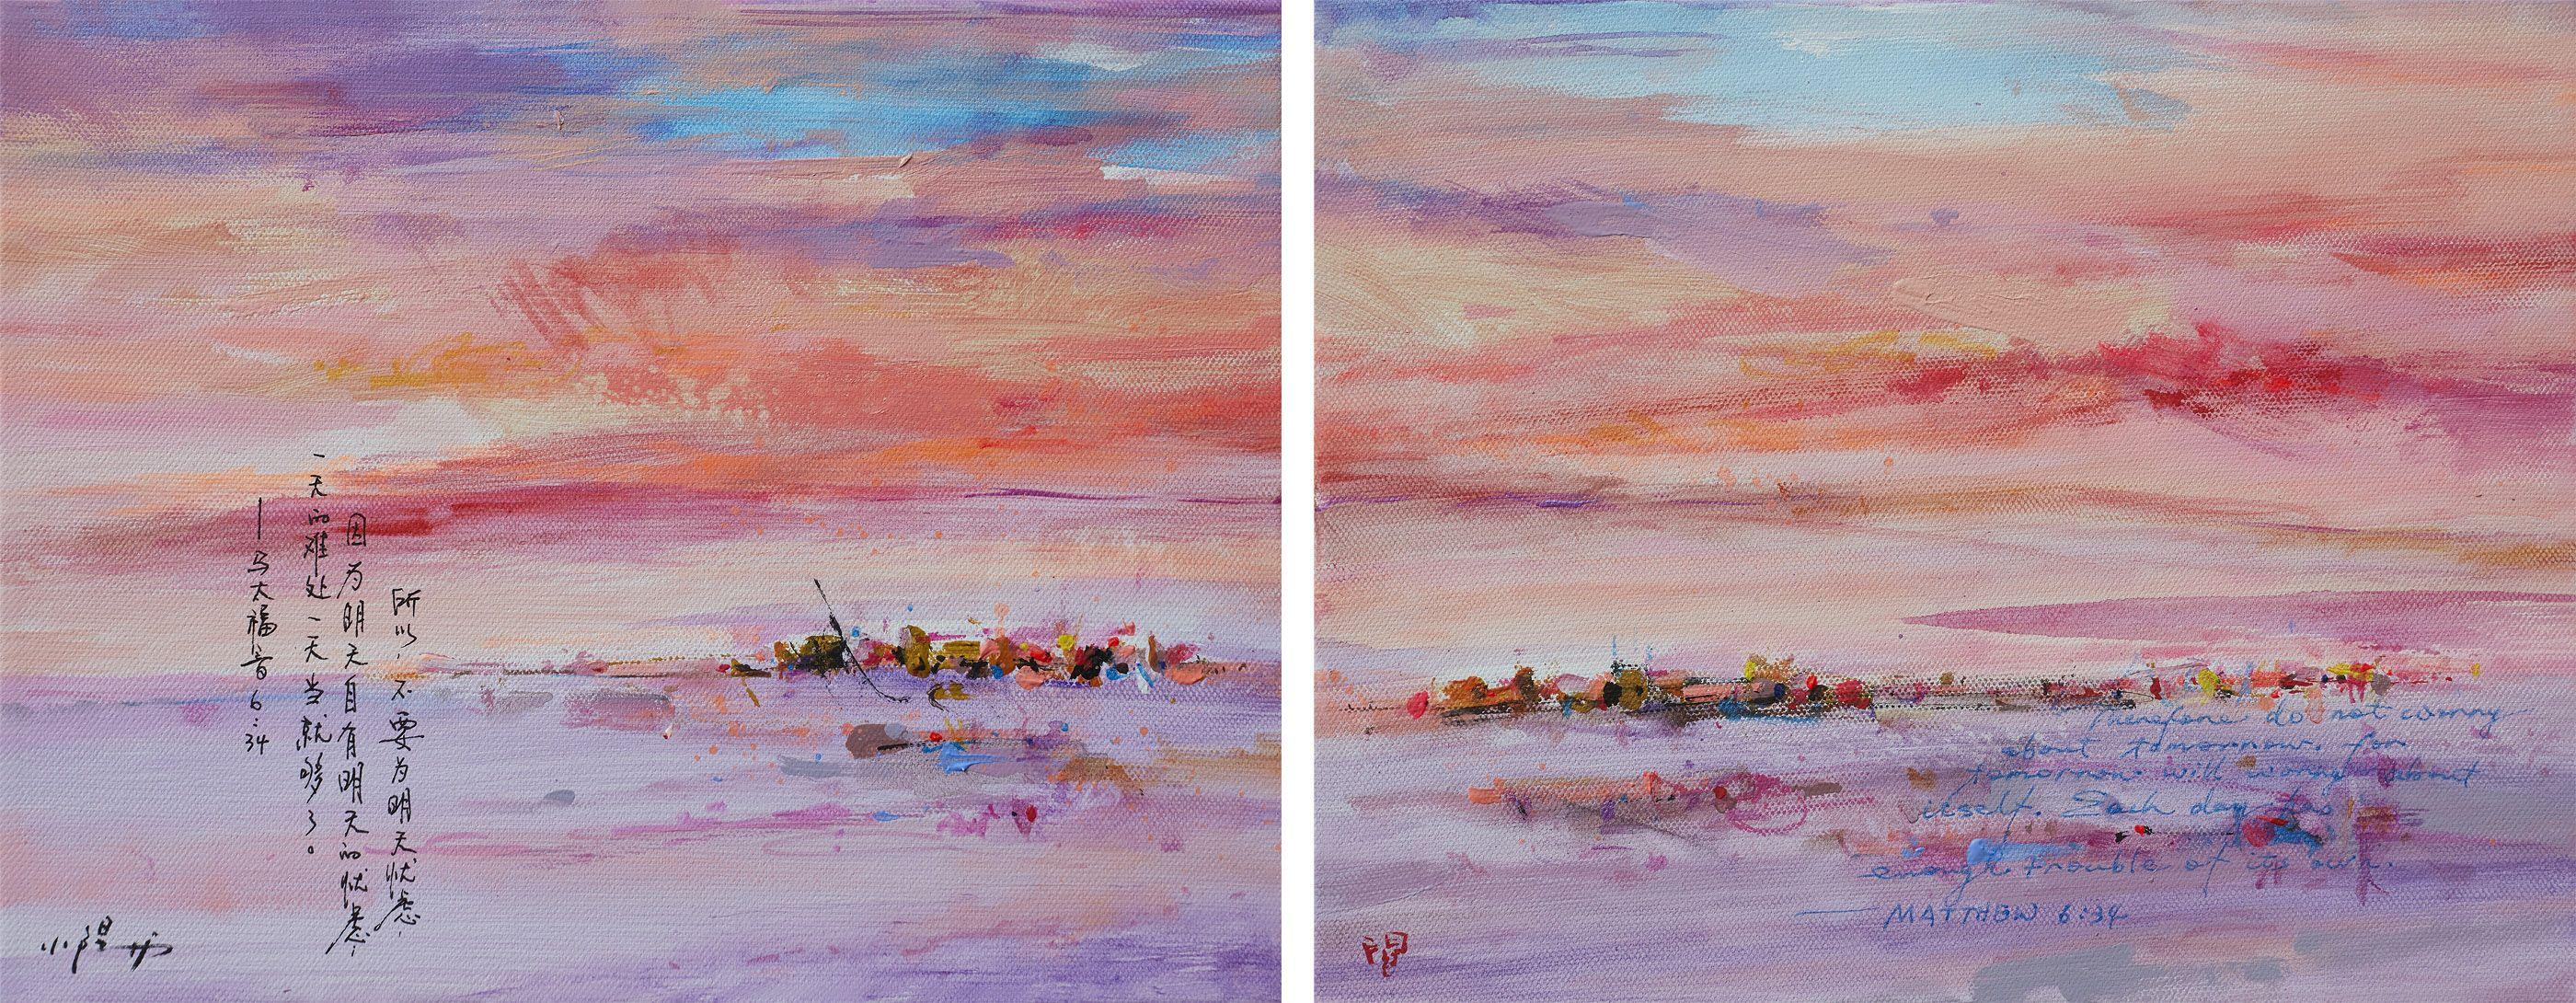 California glow, mixed media on canvas, diptych 30x24cm (x2). Inspired by the songs from film "A star is born". This is a imaginary seascape under sunset, the diptych painting is rich in colours and details. Bible verse in Chinese and English adds